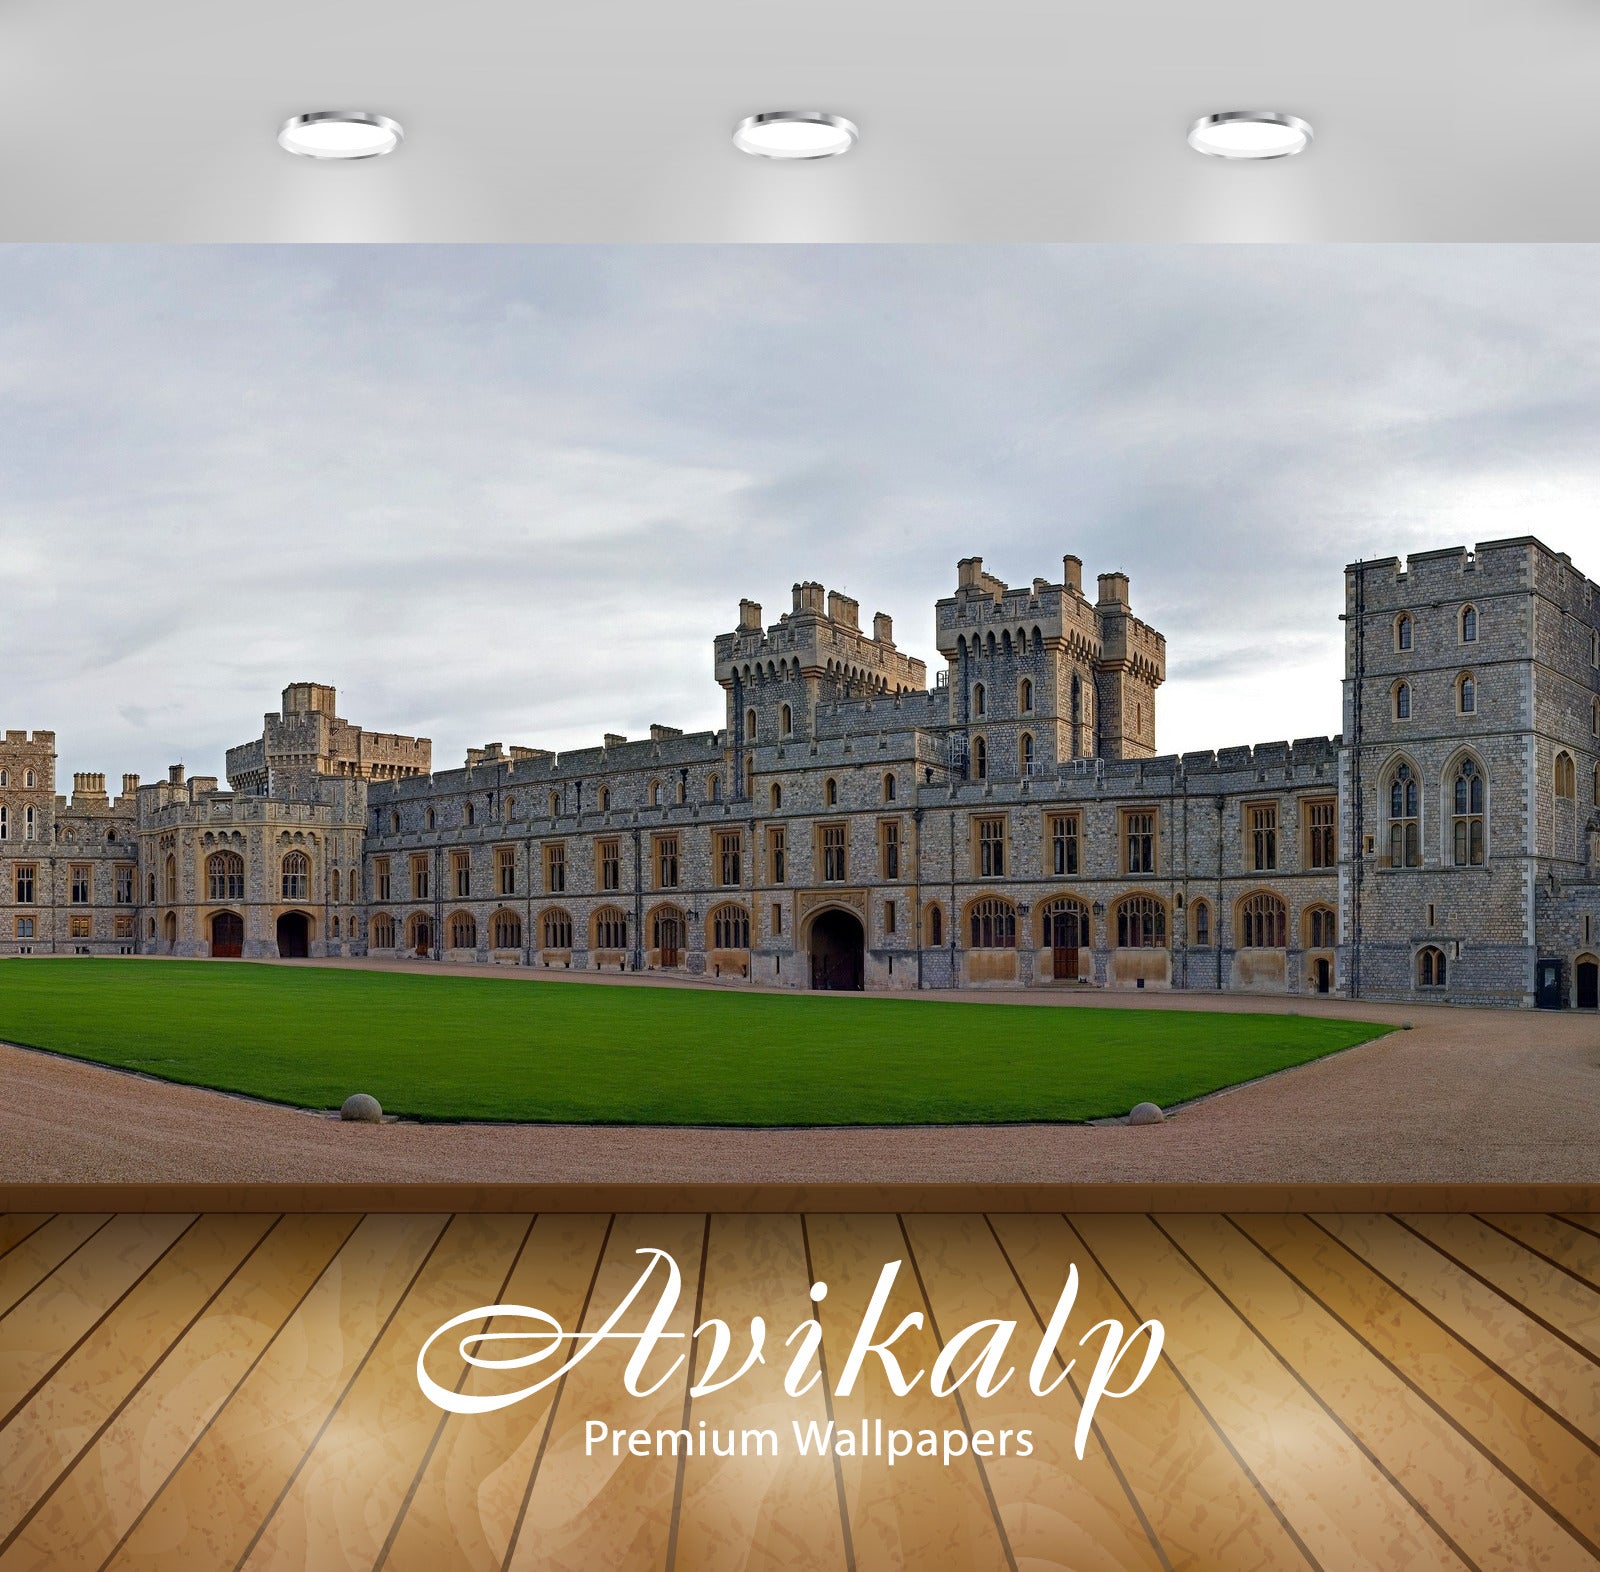 Avikalp Exclusive Awi1851 Windsor Castle England Full HD Wallpapers for Living room, Hall, Kids Room